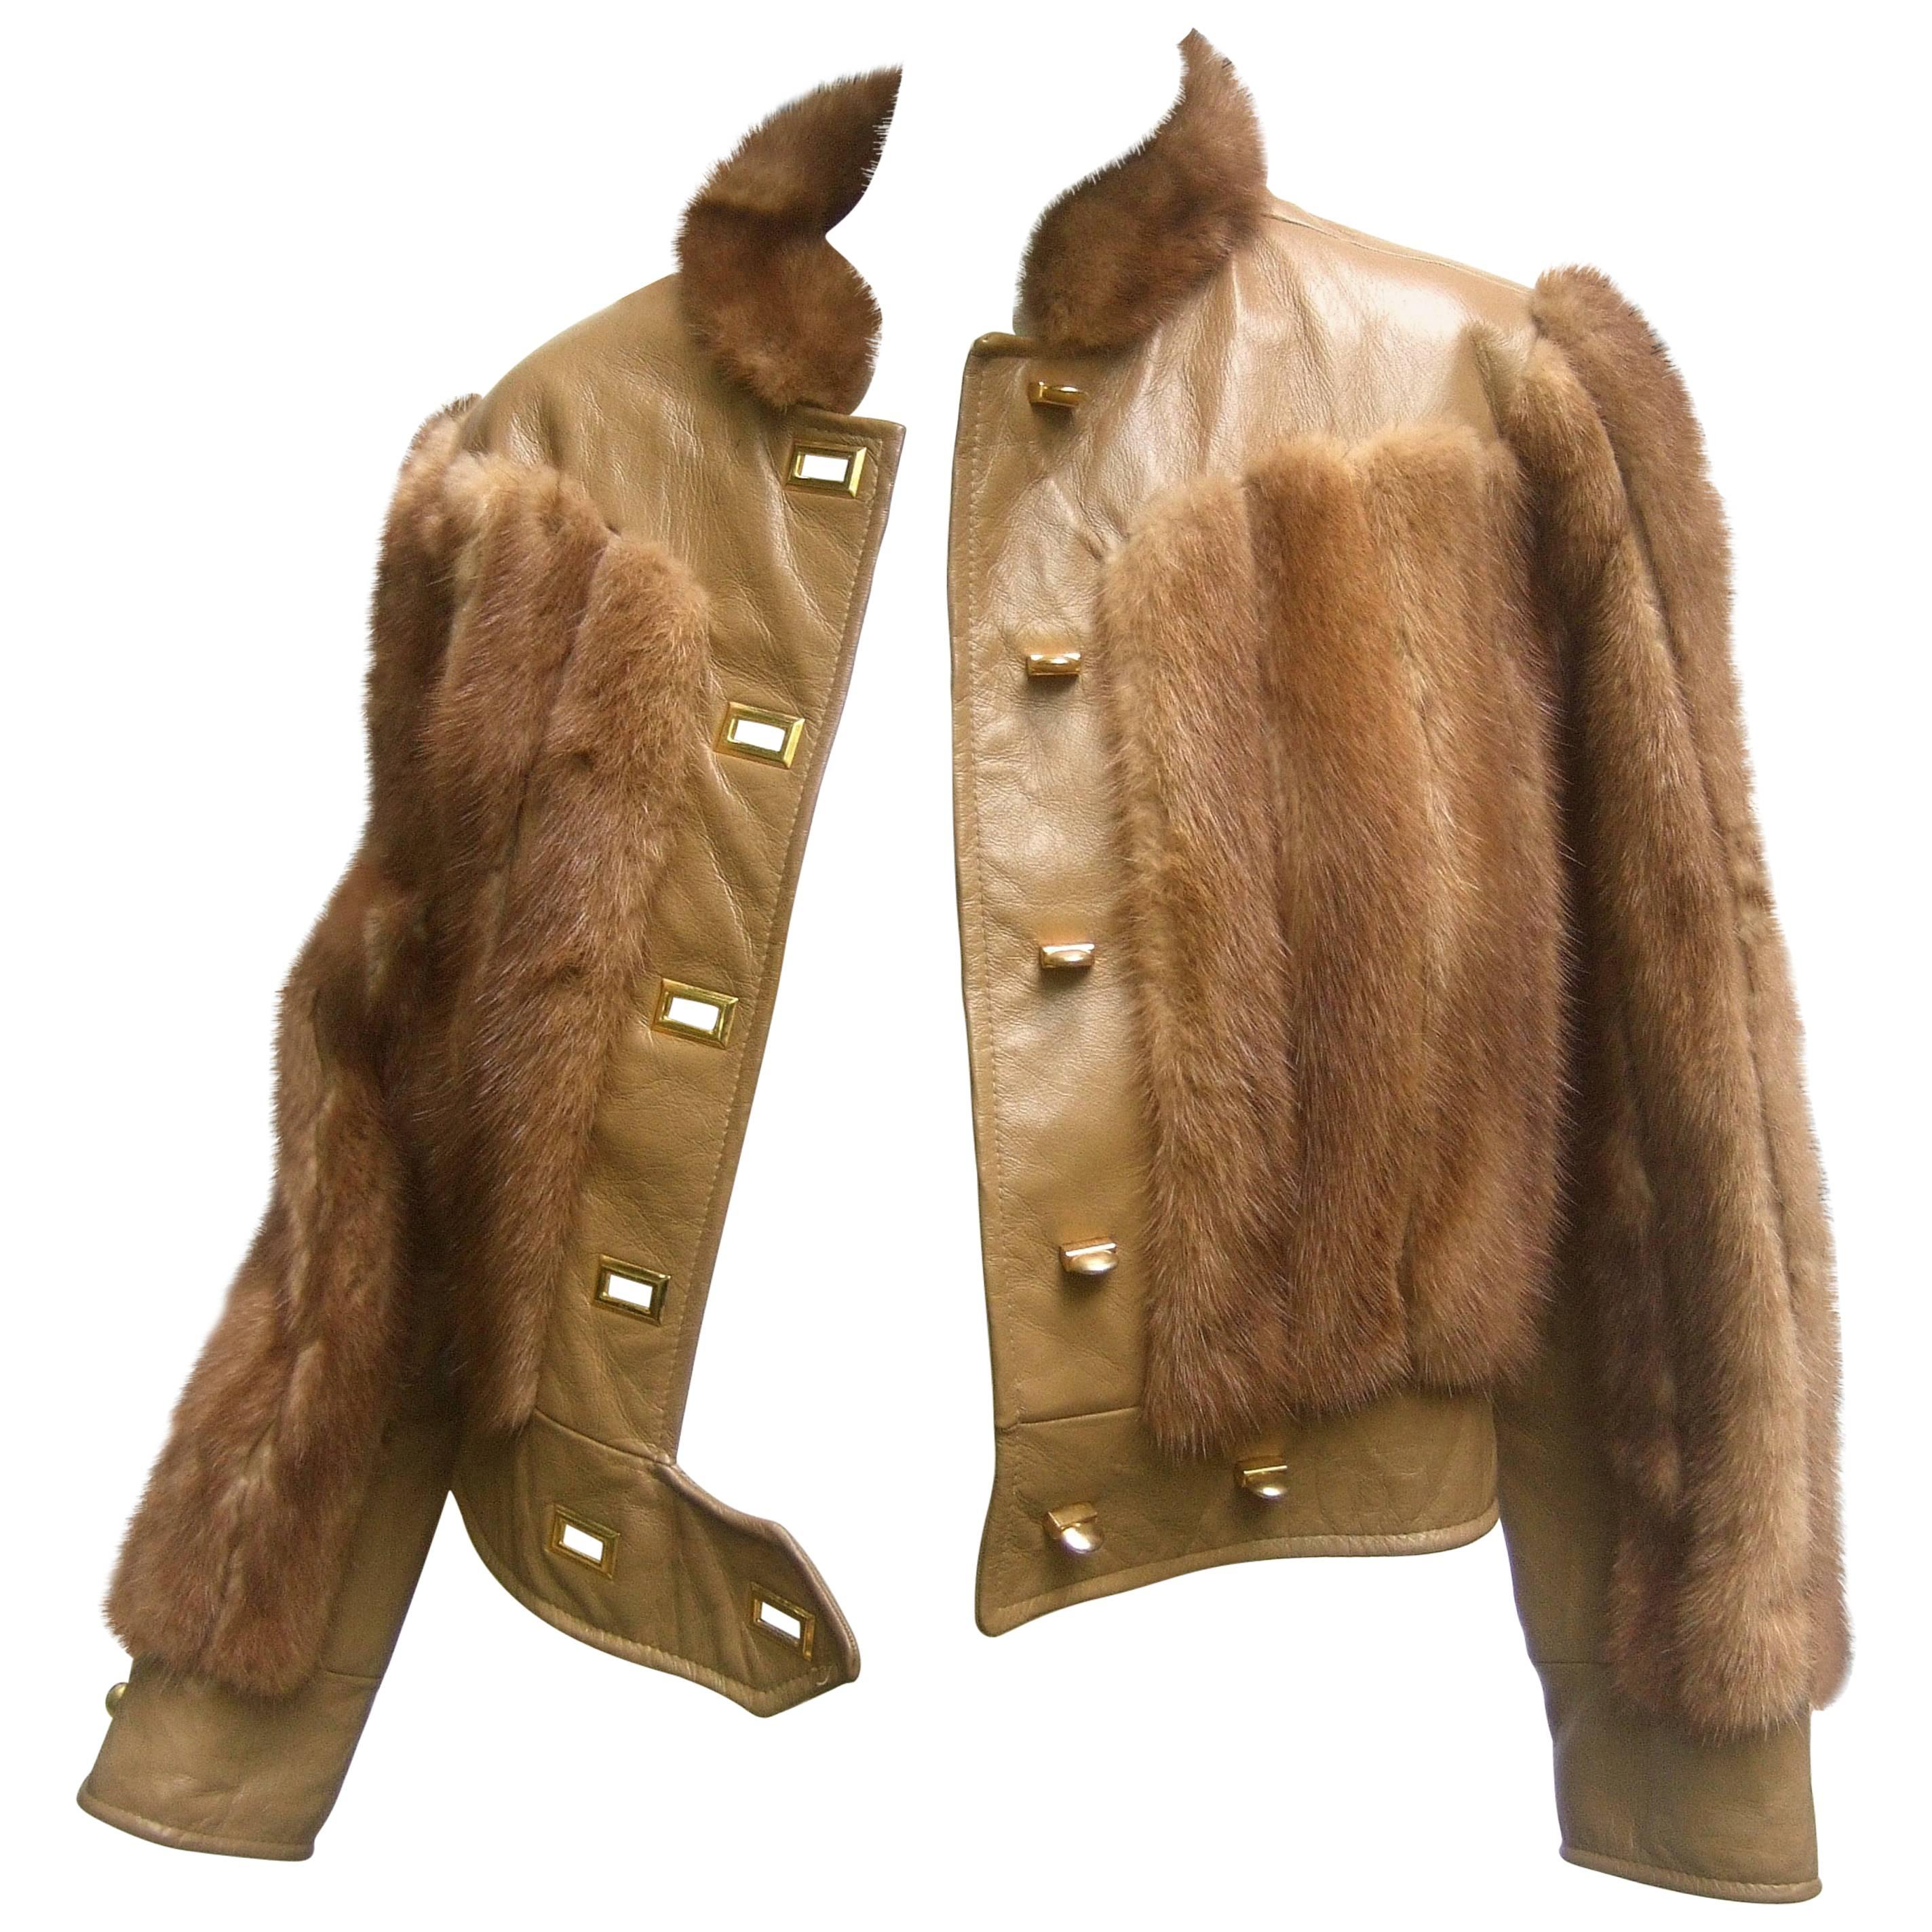 Mink & leather Eisenhower style cropped jacket c 1970s
The luxurious petite jacket is designed with plush vertical
bands of lustrous autumn brown mink fur

Juxtaposed with supple mocha brown leather borders
The mod mink & leather jacket